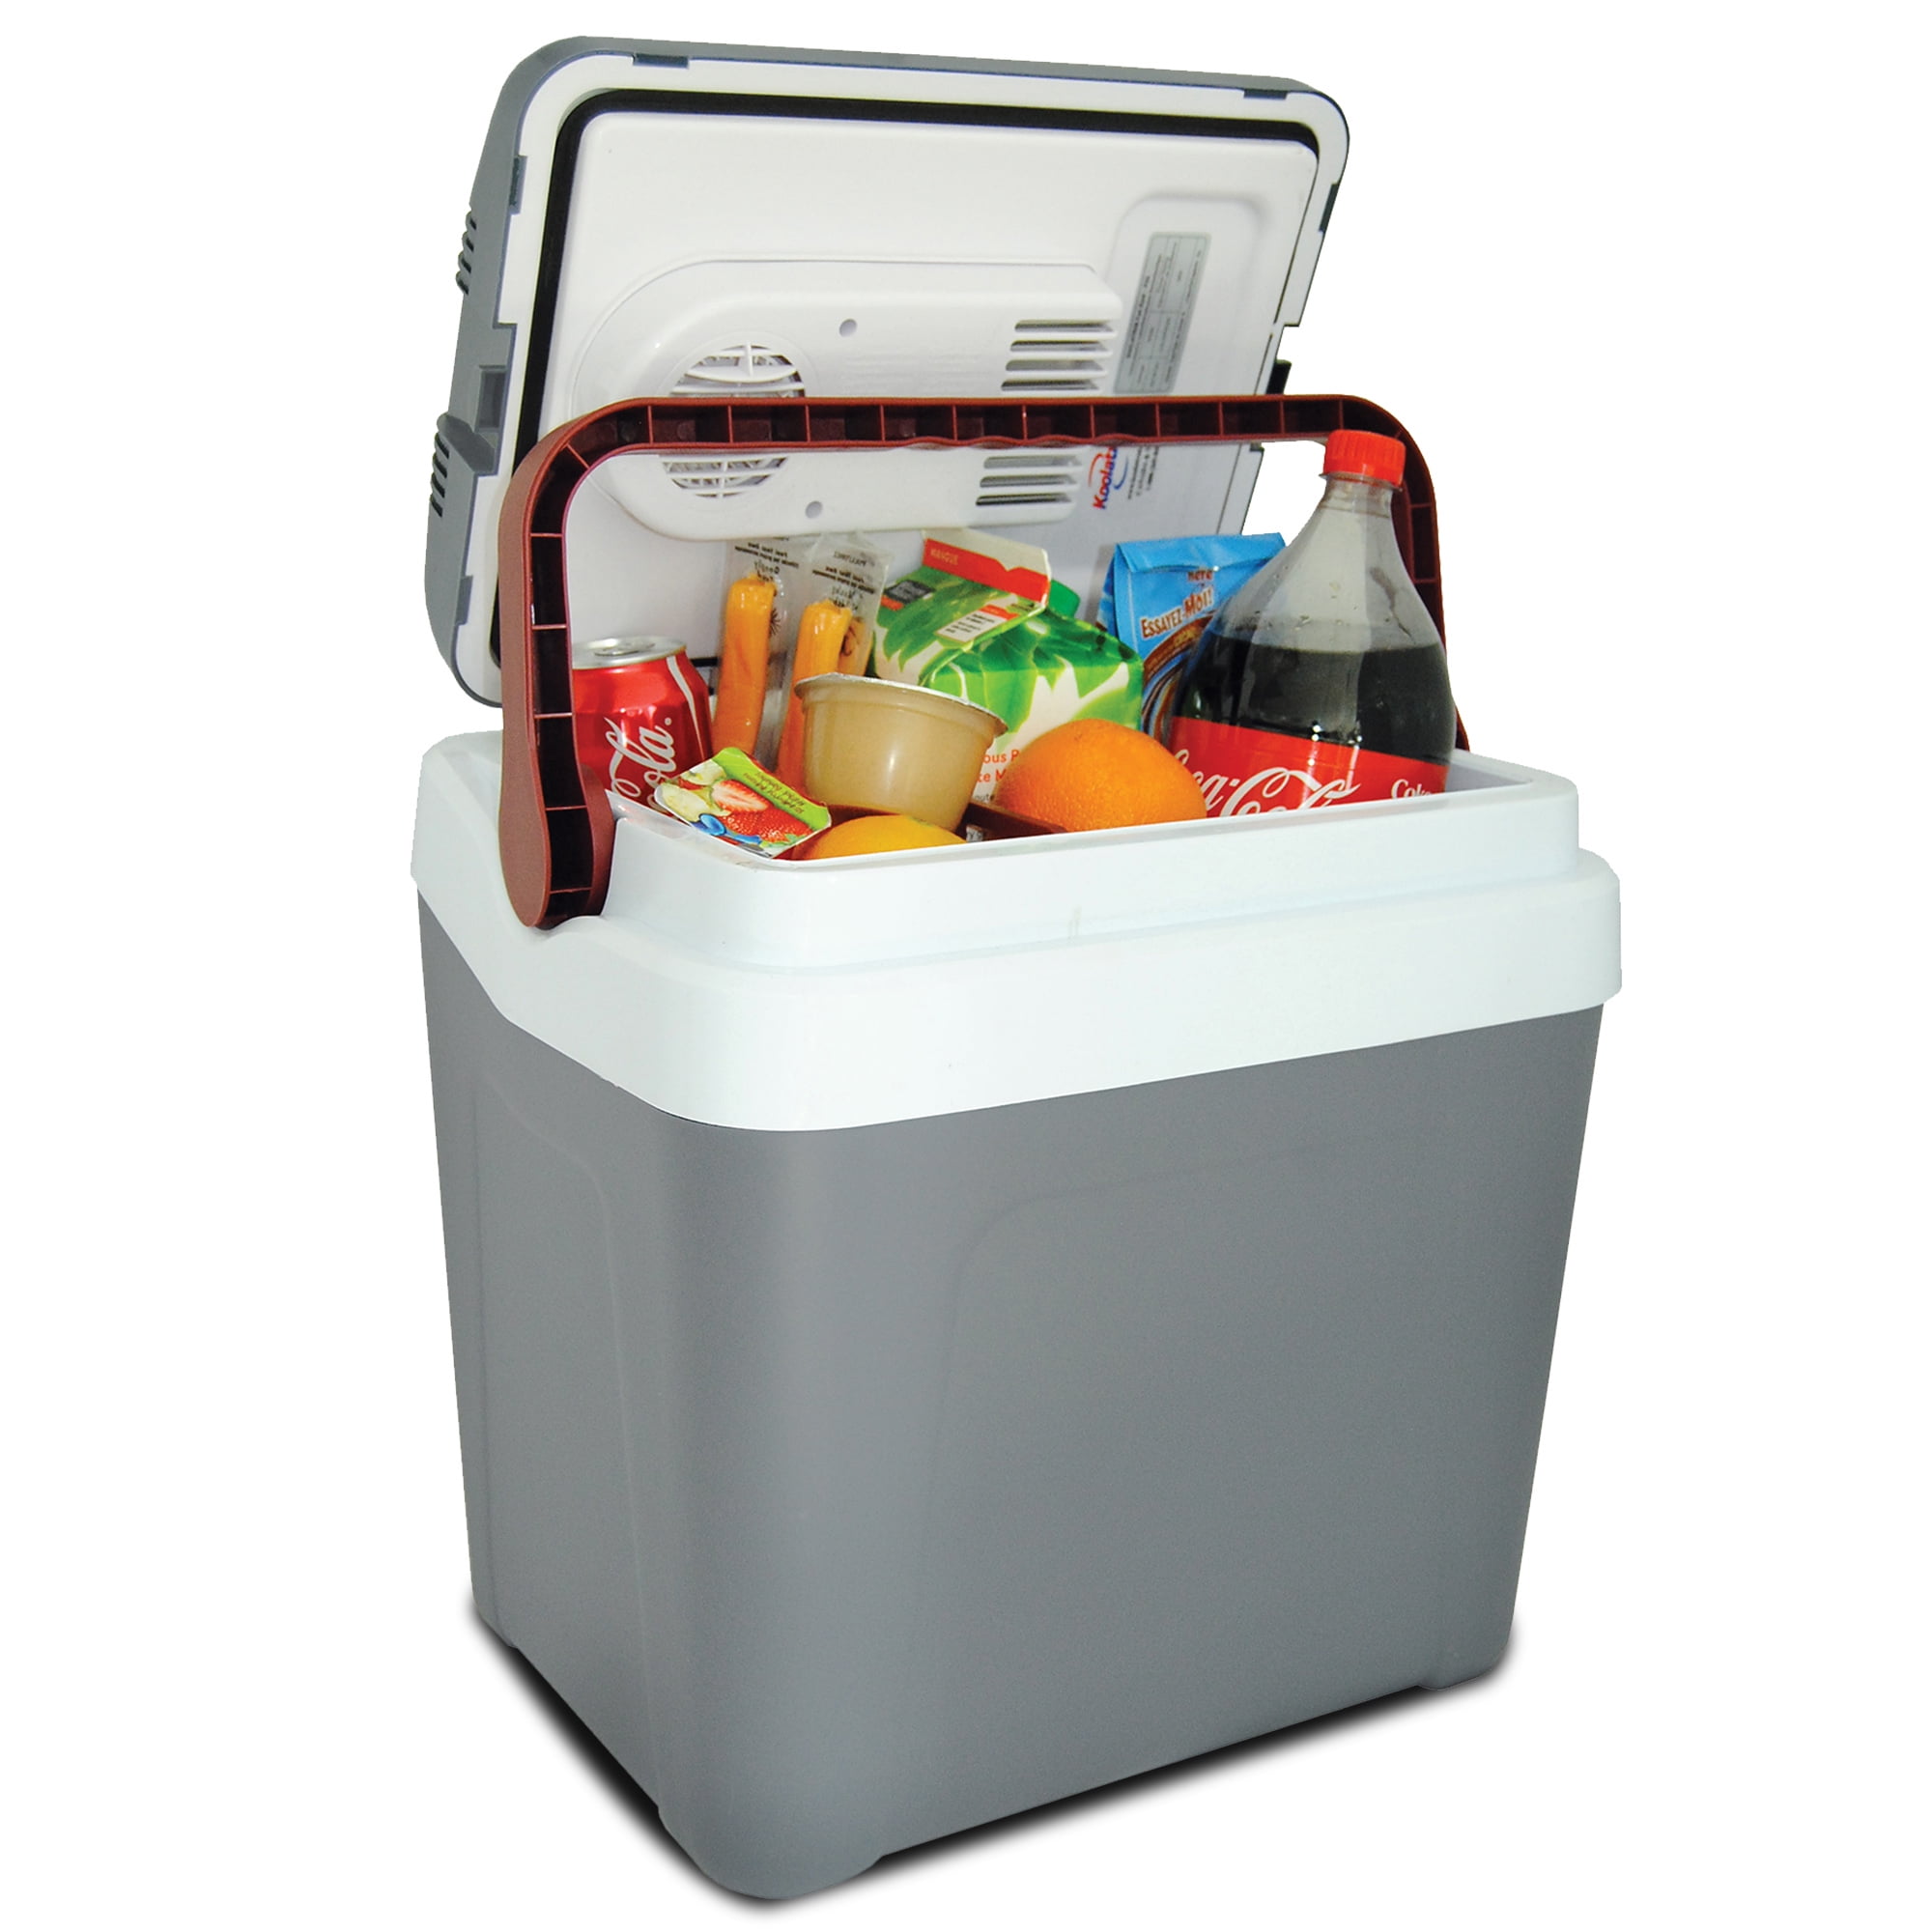 Igloo coolers Sport 7.5L Thermo